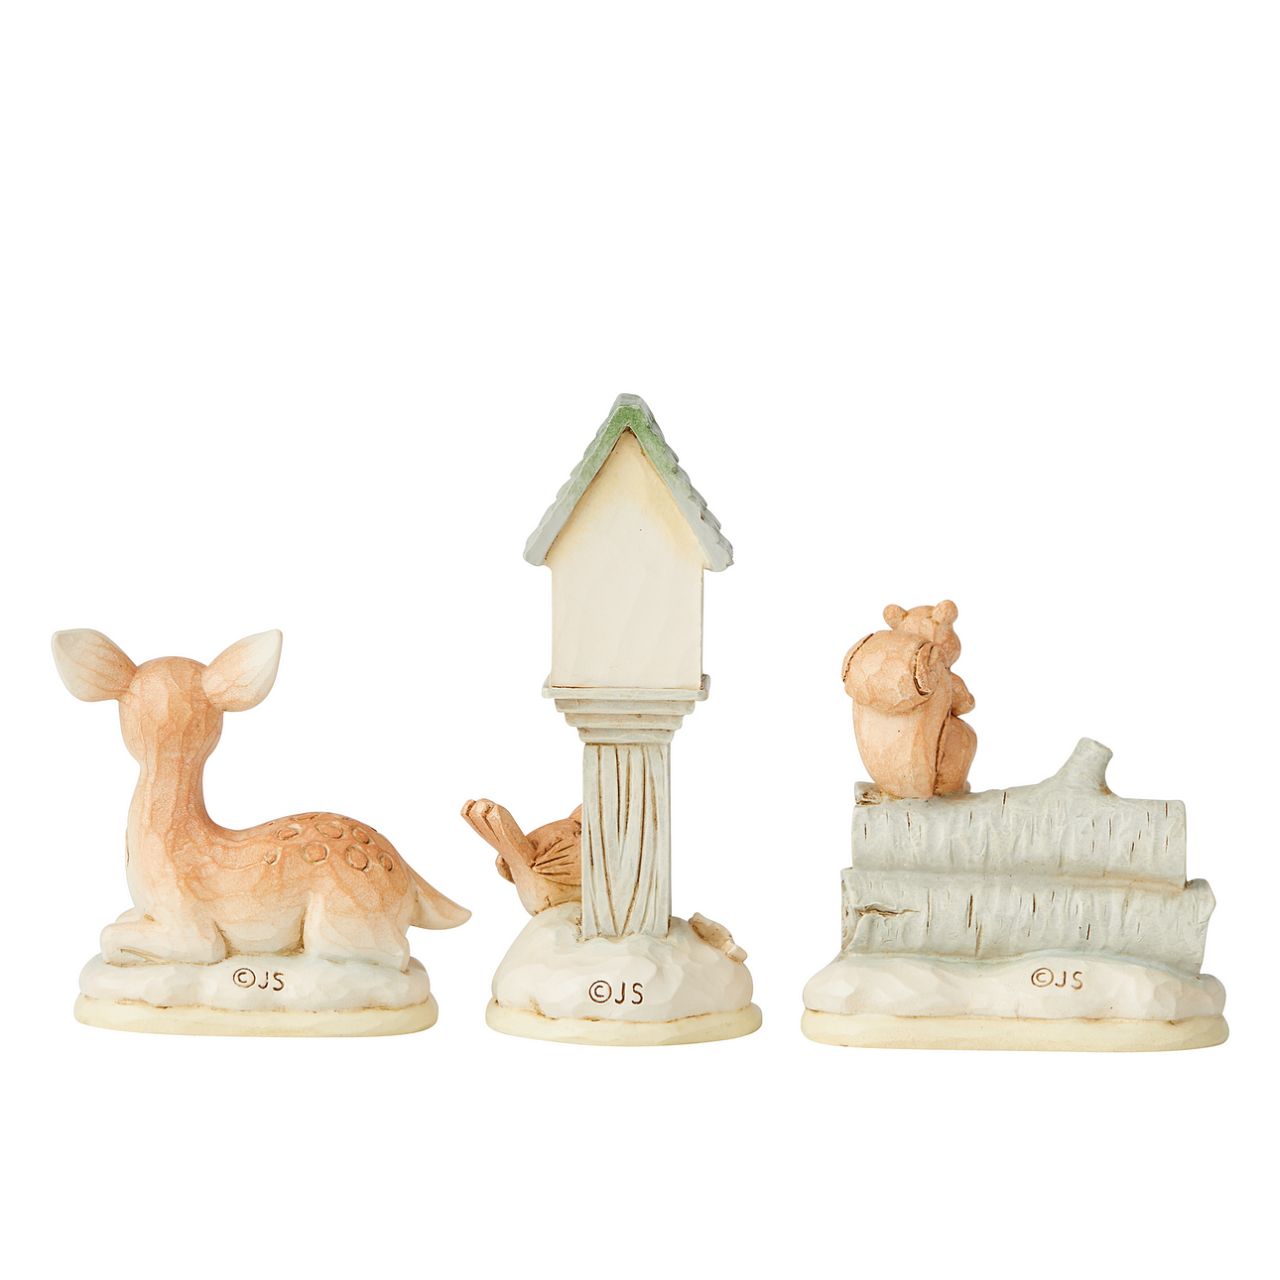 Jim Shore White Woodland Mini Accessory Set of 3  Beautifully decorated in delightful detail, this charming set of three White Woodland forest friends, a Bird with Bird House, a Deer and an adorable Squirrel, feature a wintry colour palette and Jim Shore's whimsical folk art design with holiday accents.